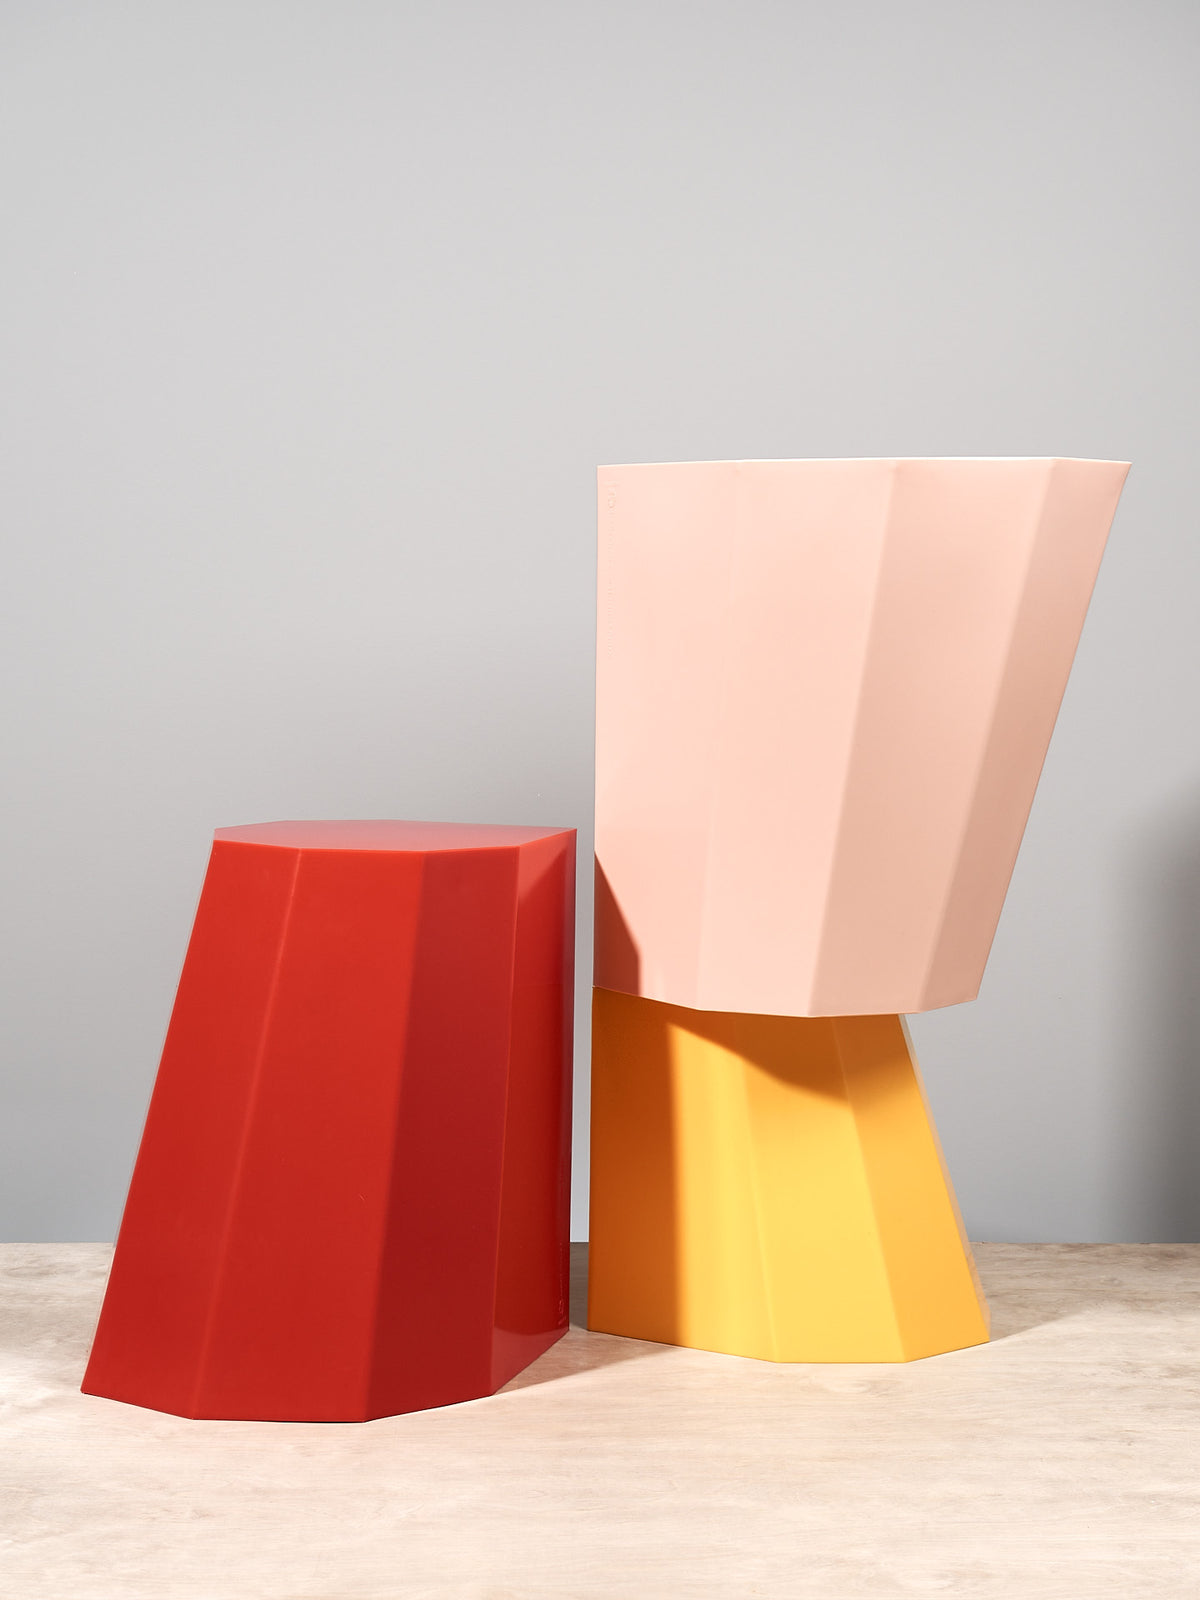 A pair of Arnold Circus Stools - Red by Martino Gamper on a wooden table.